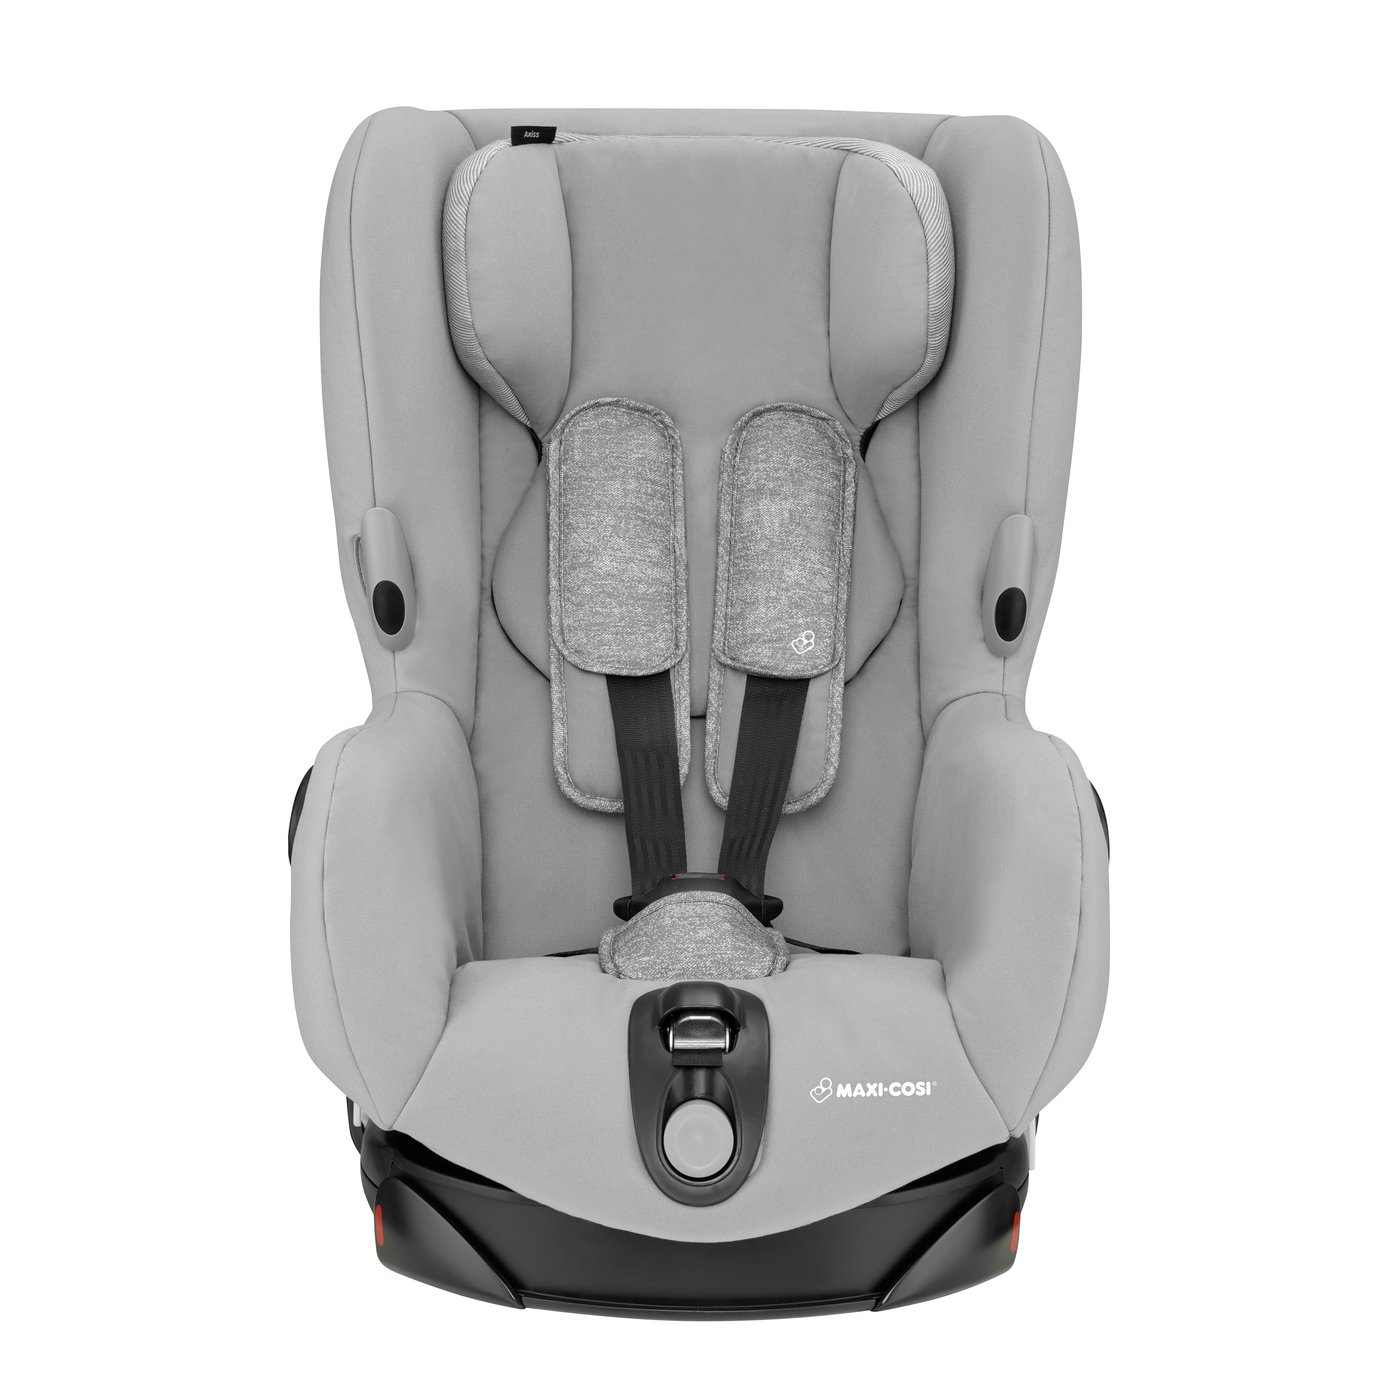 Maxi-Cosi Axiss Group 1 Car Seat - Nomad Grey